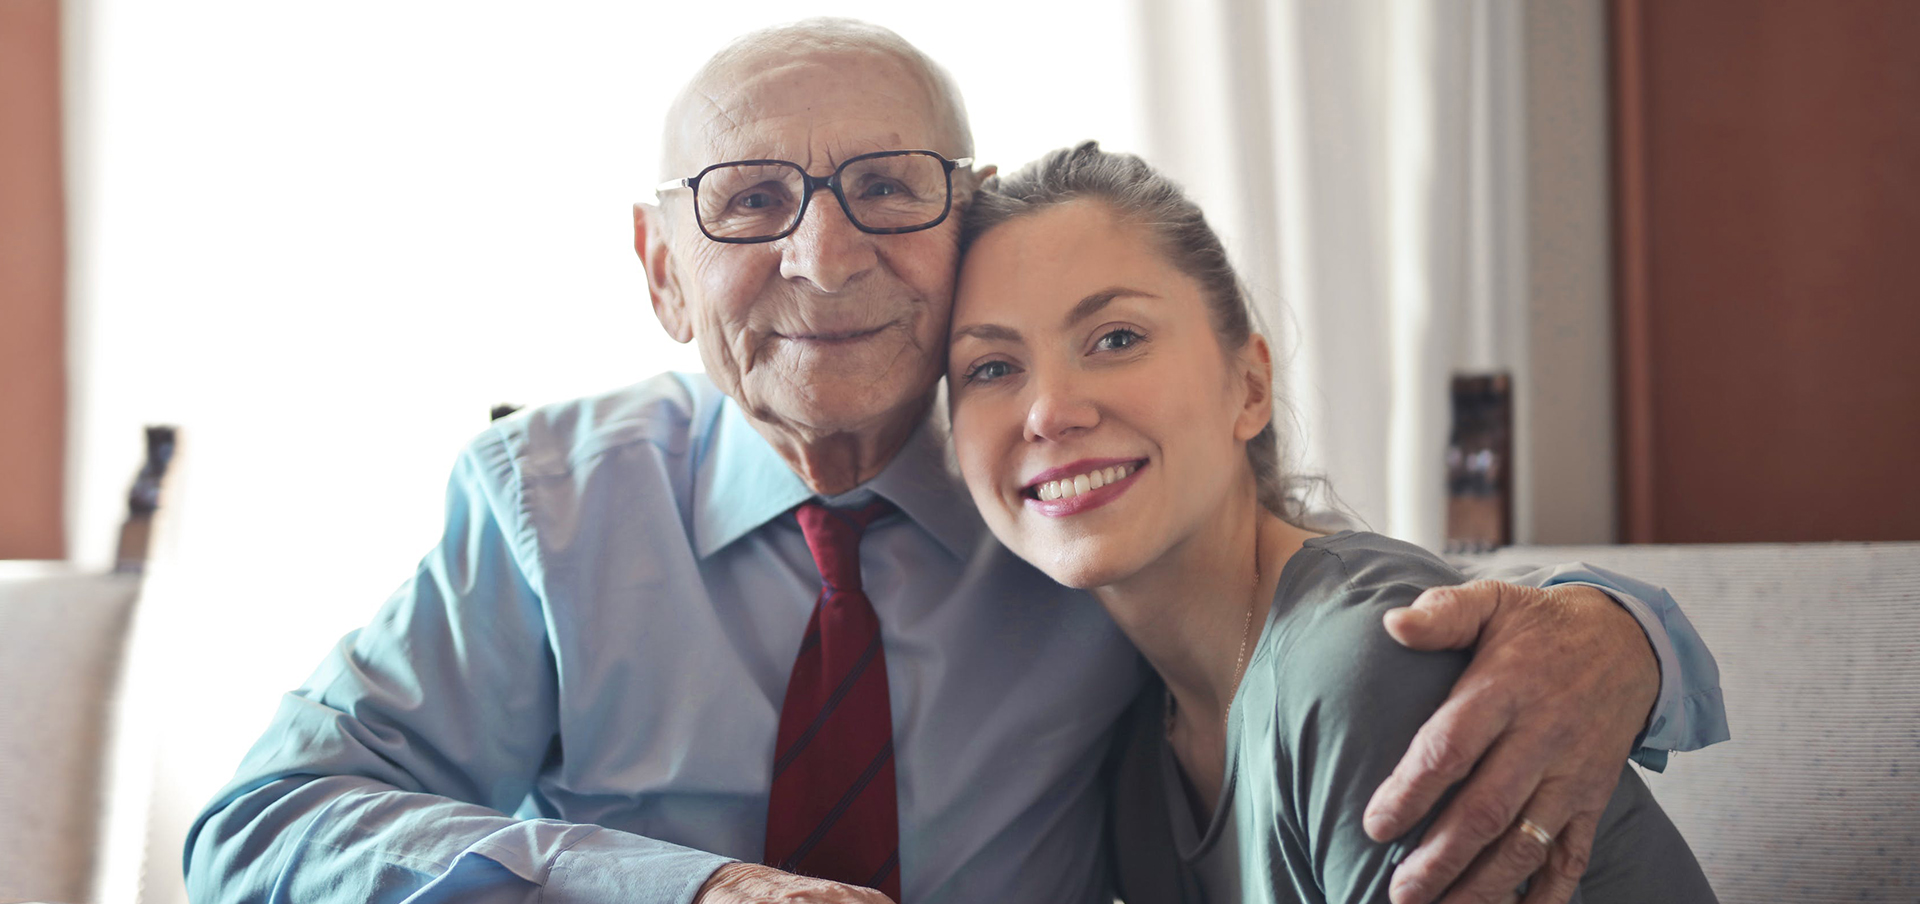 Elderly white man and granddaughter embracing- Photo by Andrea Piacquadio from Pexels